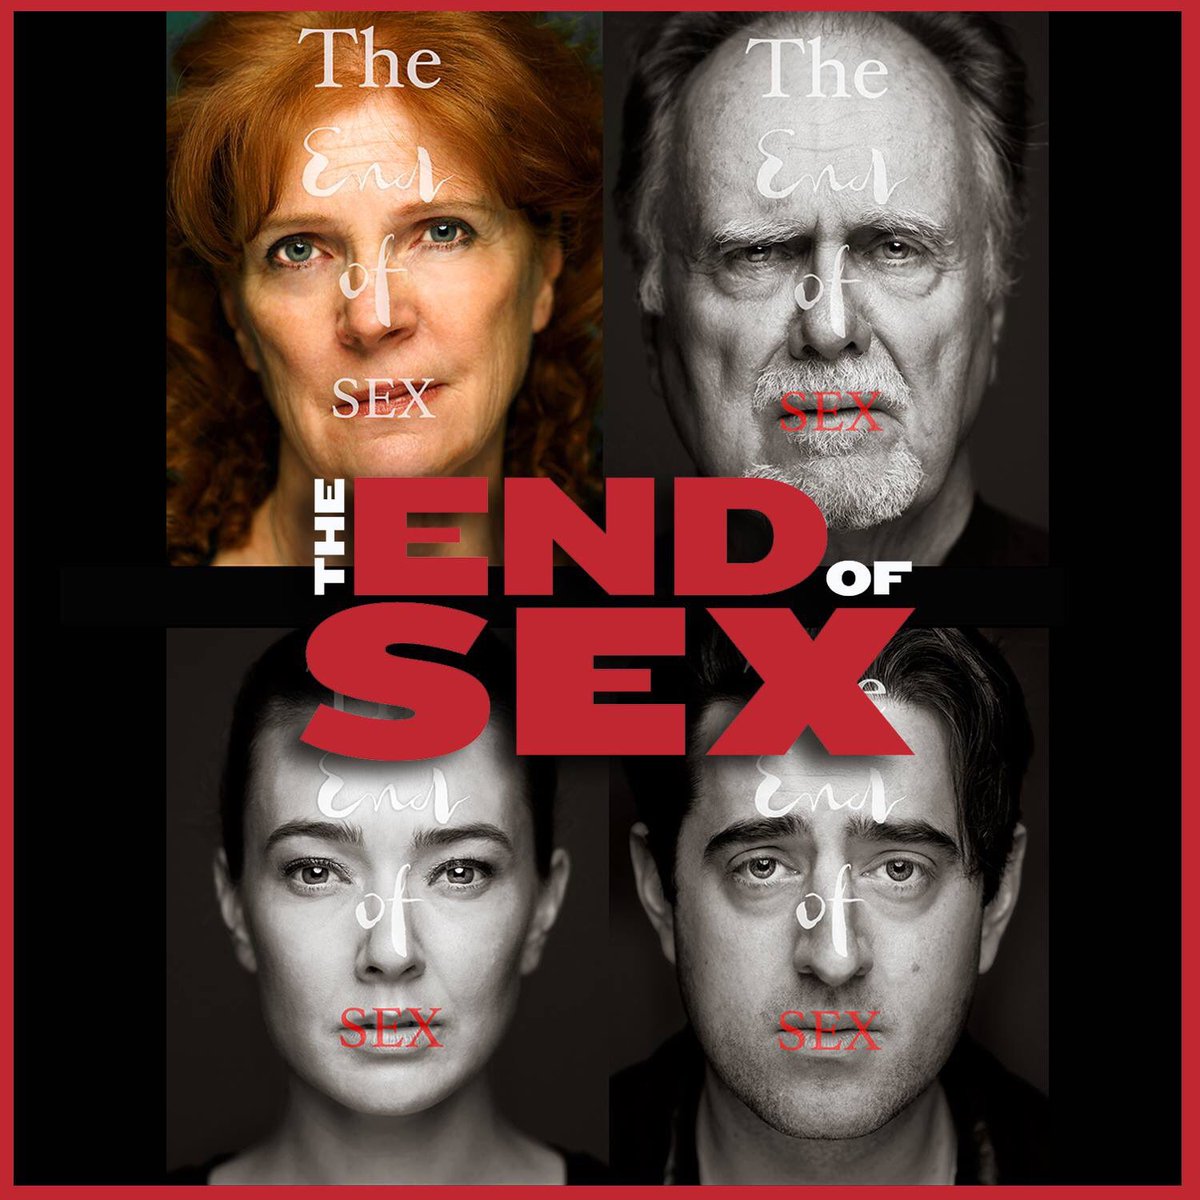 The End of Sex - A World Premiere is coming...
Family. Marriage. Sexual politics.
The accommodations we make.
No one talks about this. 
But we are.
Very soon.
.
Join us for this world premiere by #womenplaywright Gay Walch. Previews begin April 19.
.
bit.ly/2U0mFfG